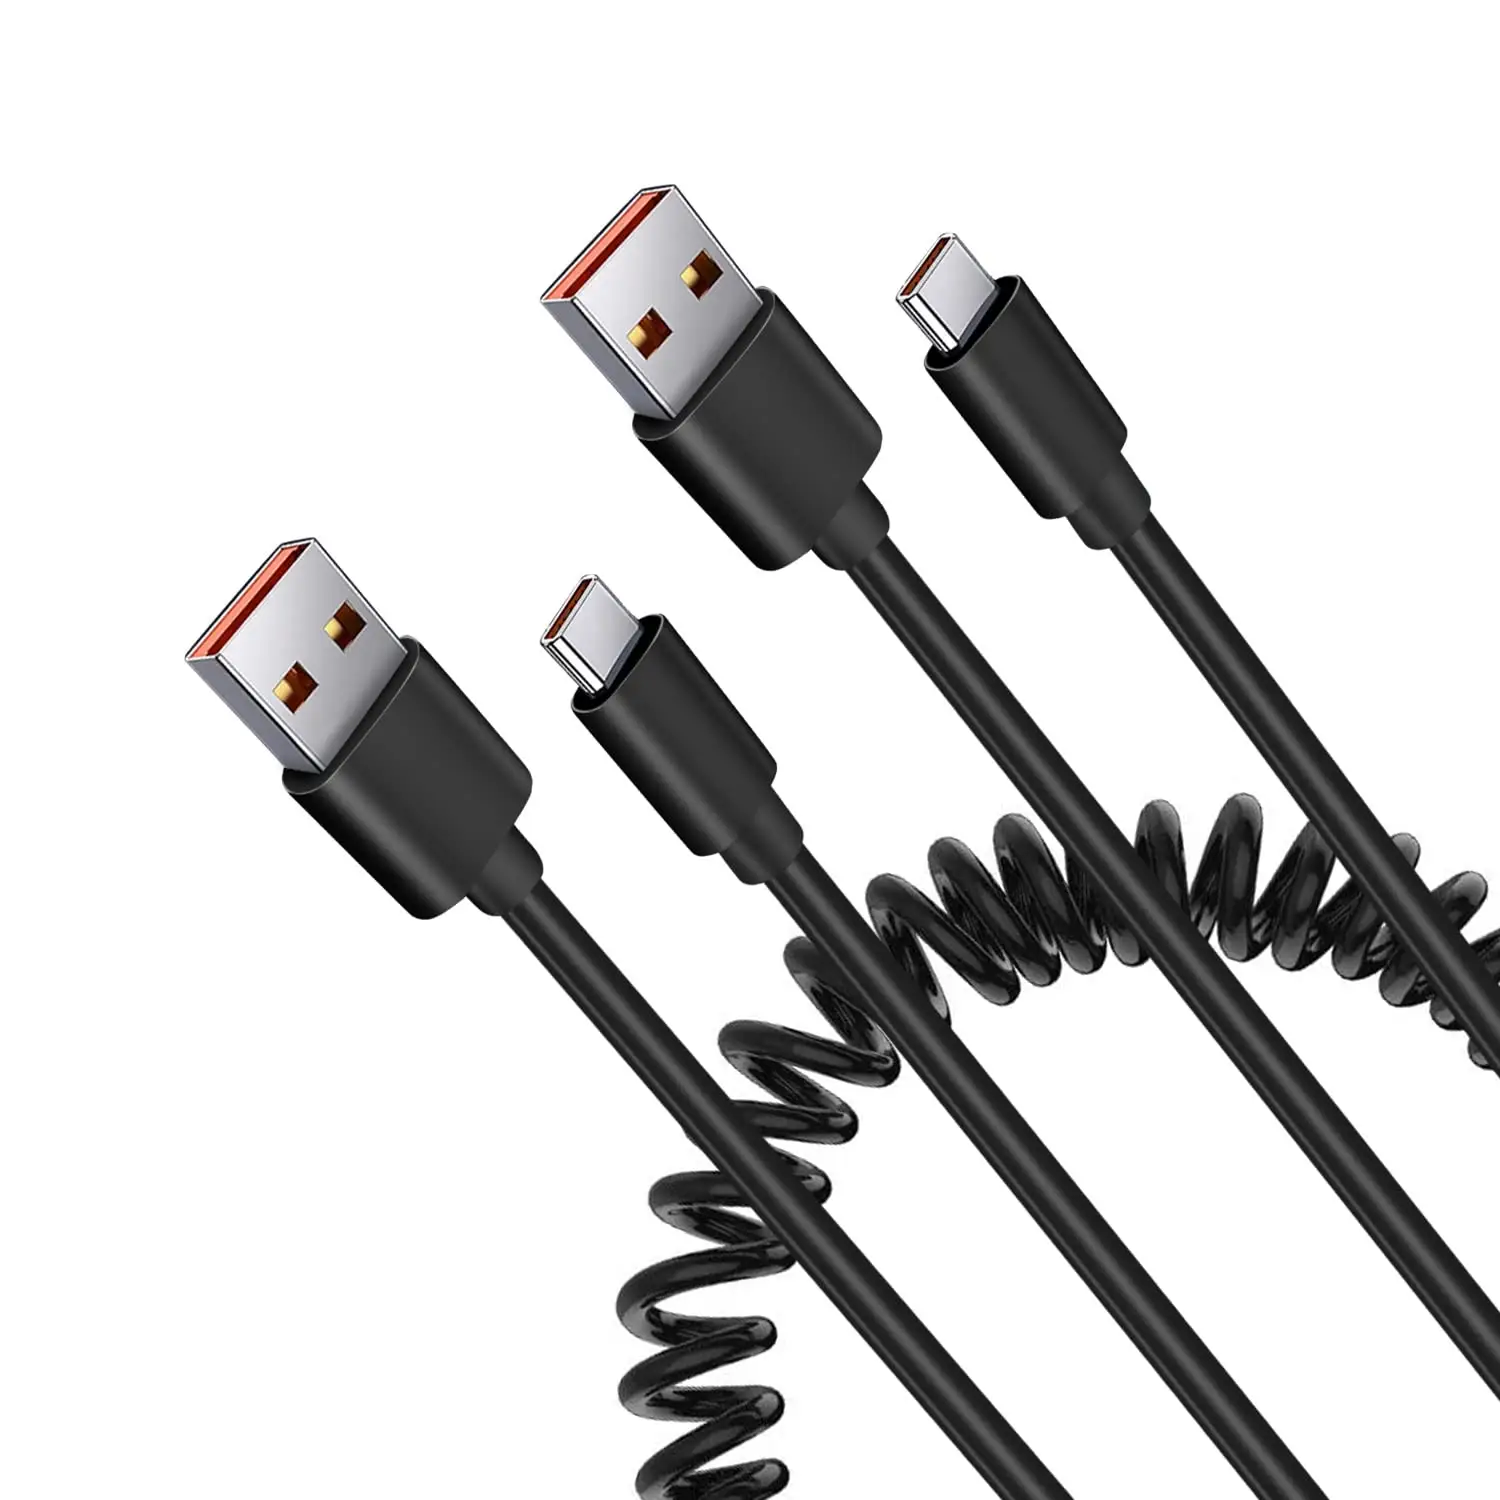 Black 1M 3A 60W USB C Cable Retractable spring USB A to C Coiled Cable Stretched to 3.3 Feet USB 2.0 Fast Charging Data Cable